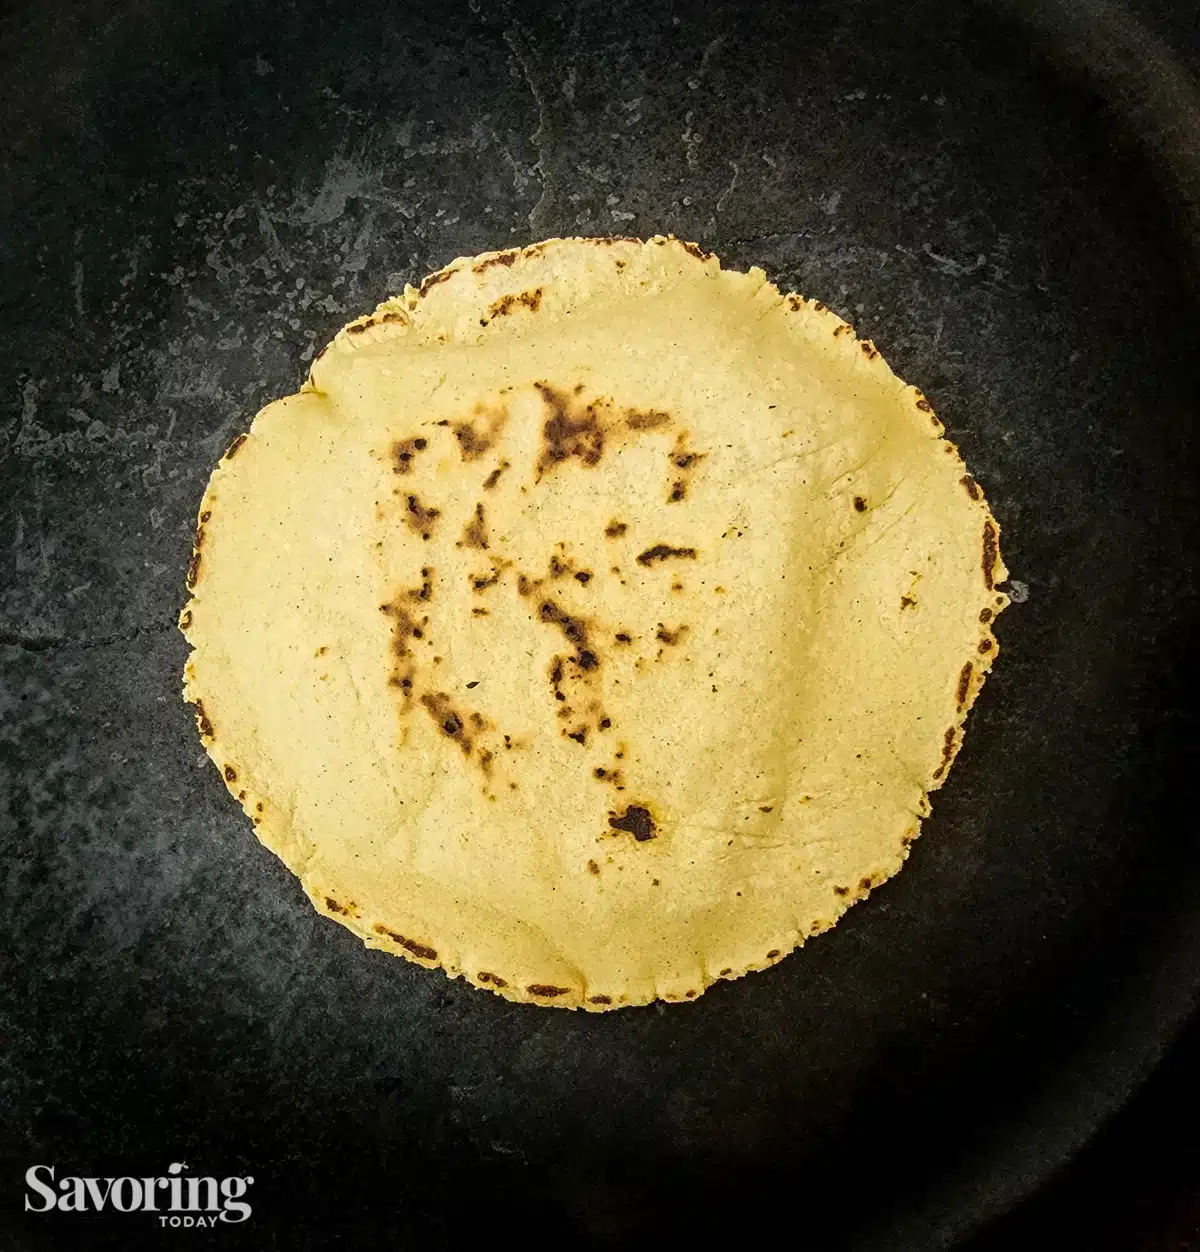 A cooked corn tortilla on a black cast iron skillet